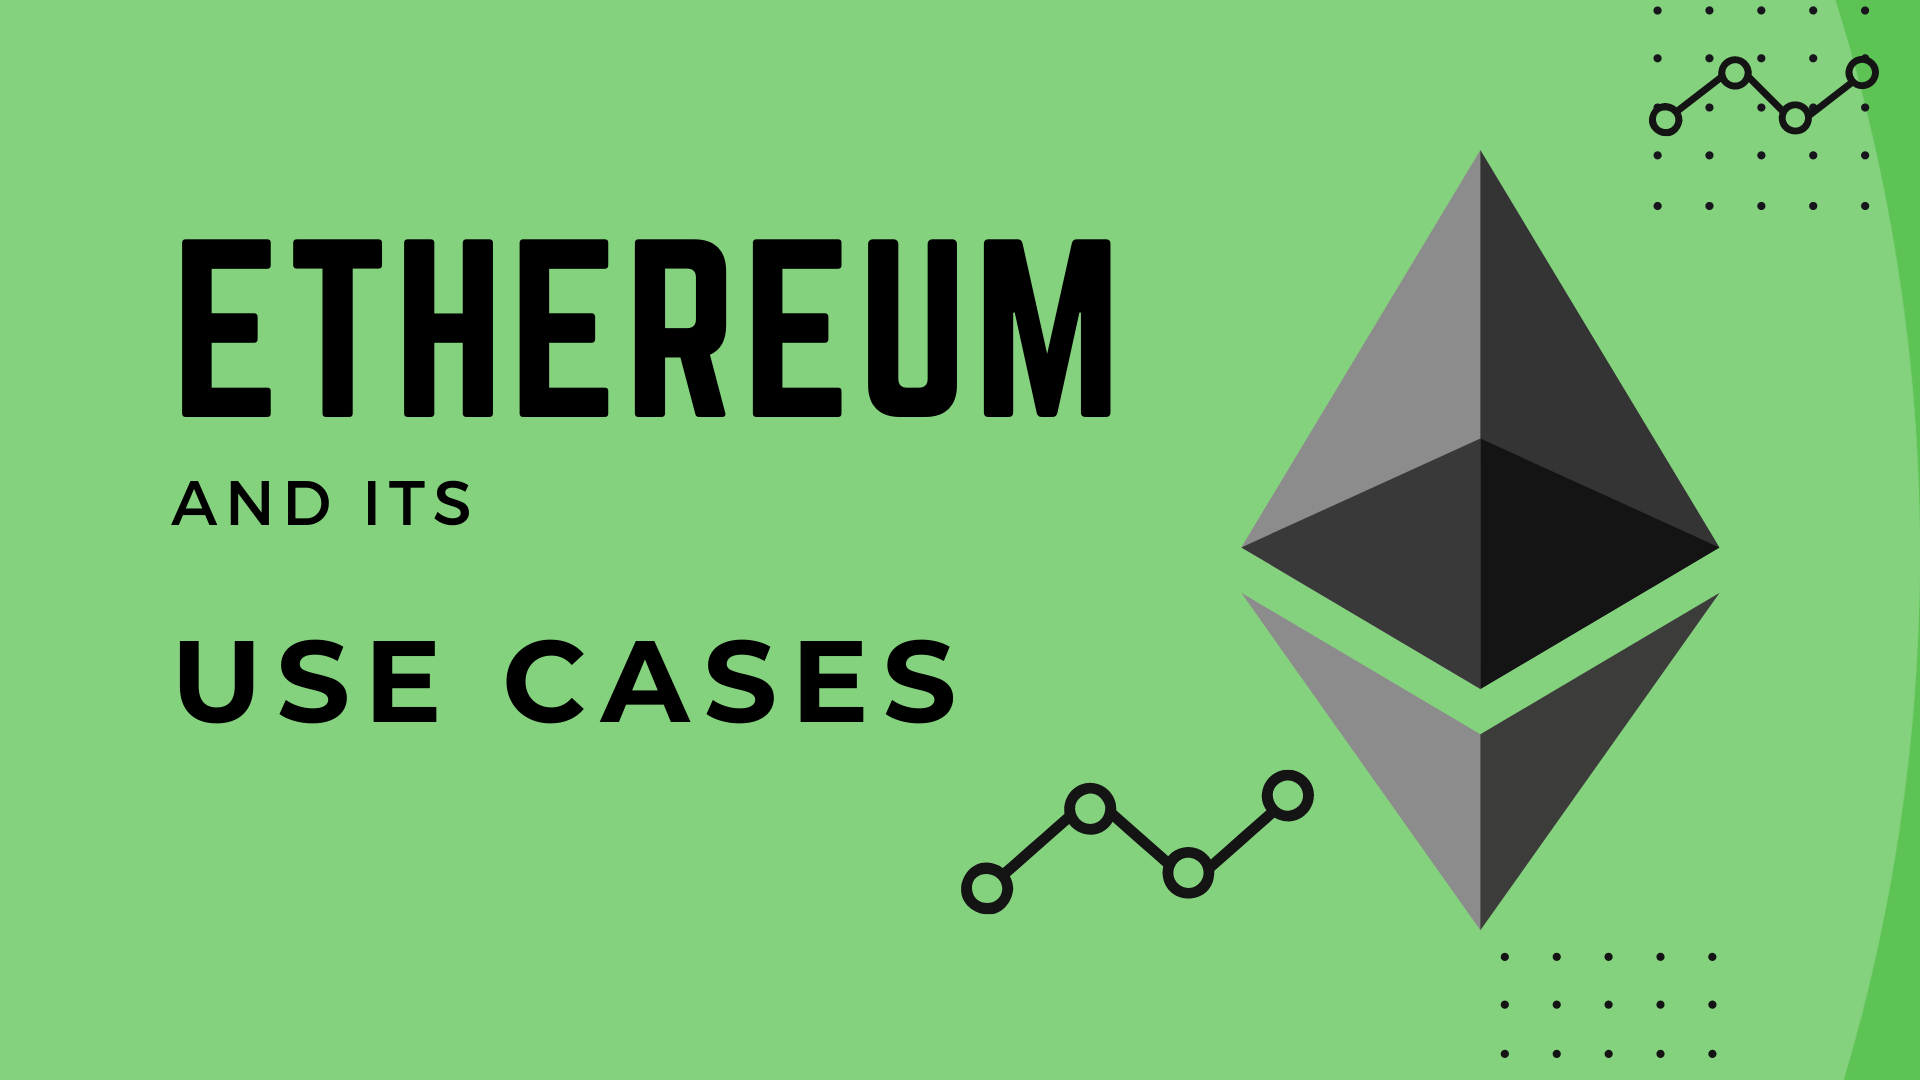 Why ethereum